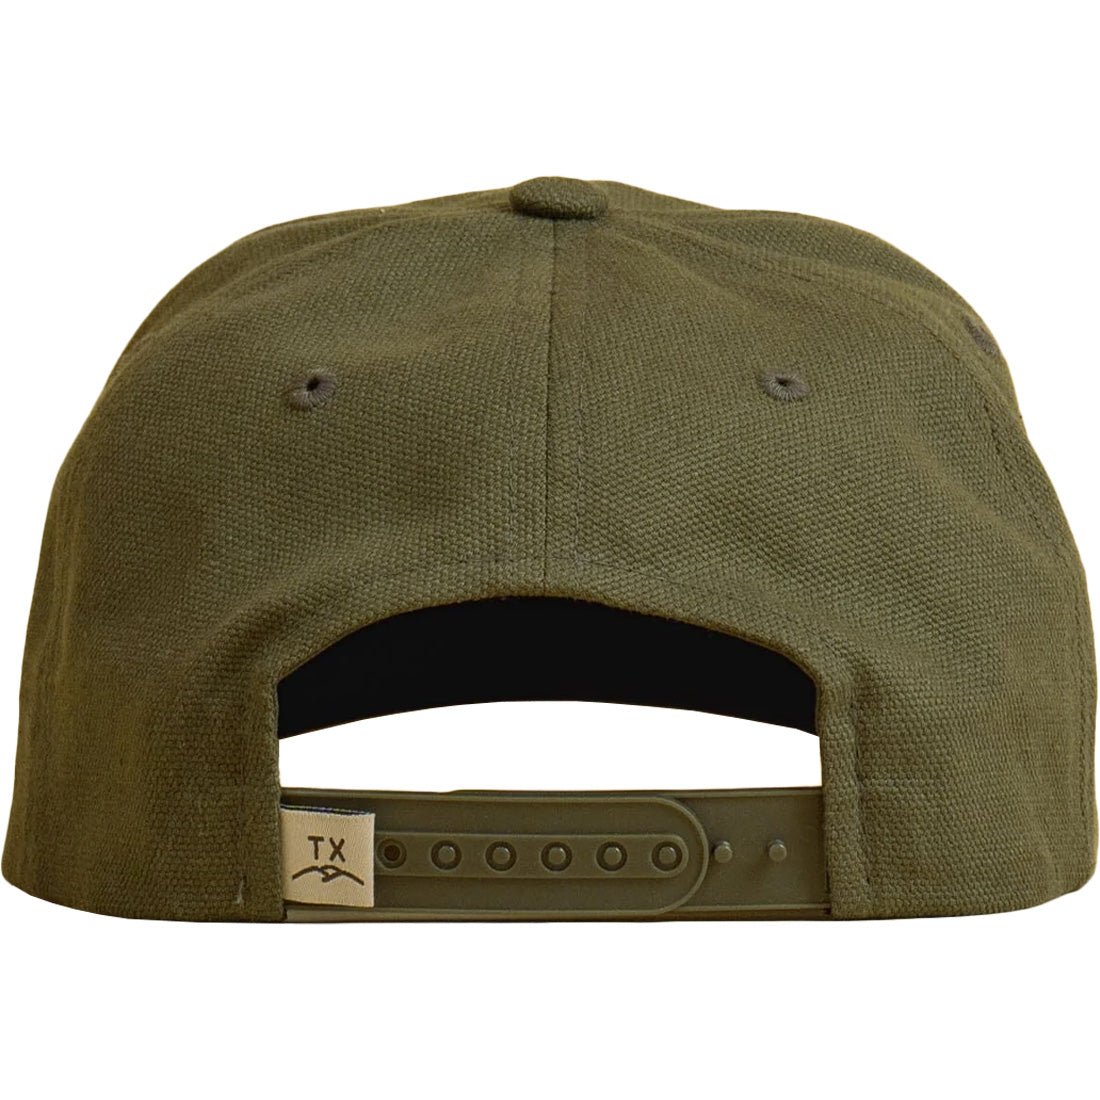 THC Provisions Hill Country Dillo Hat